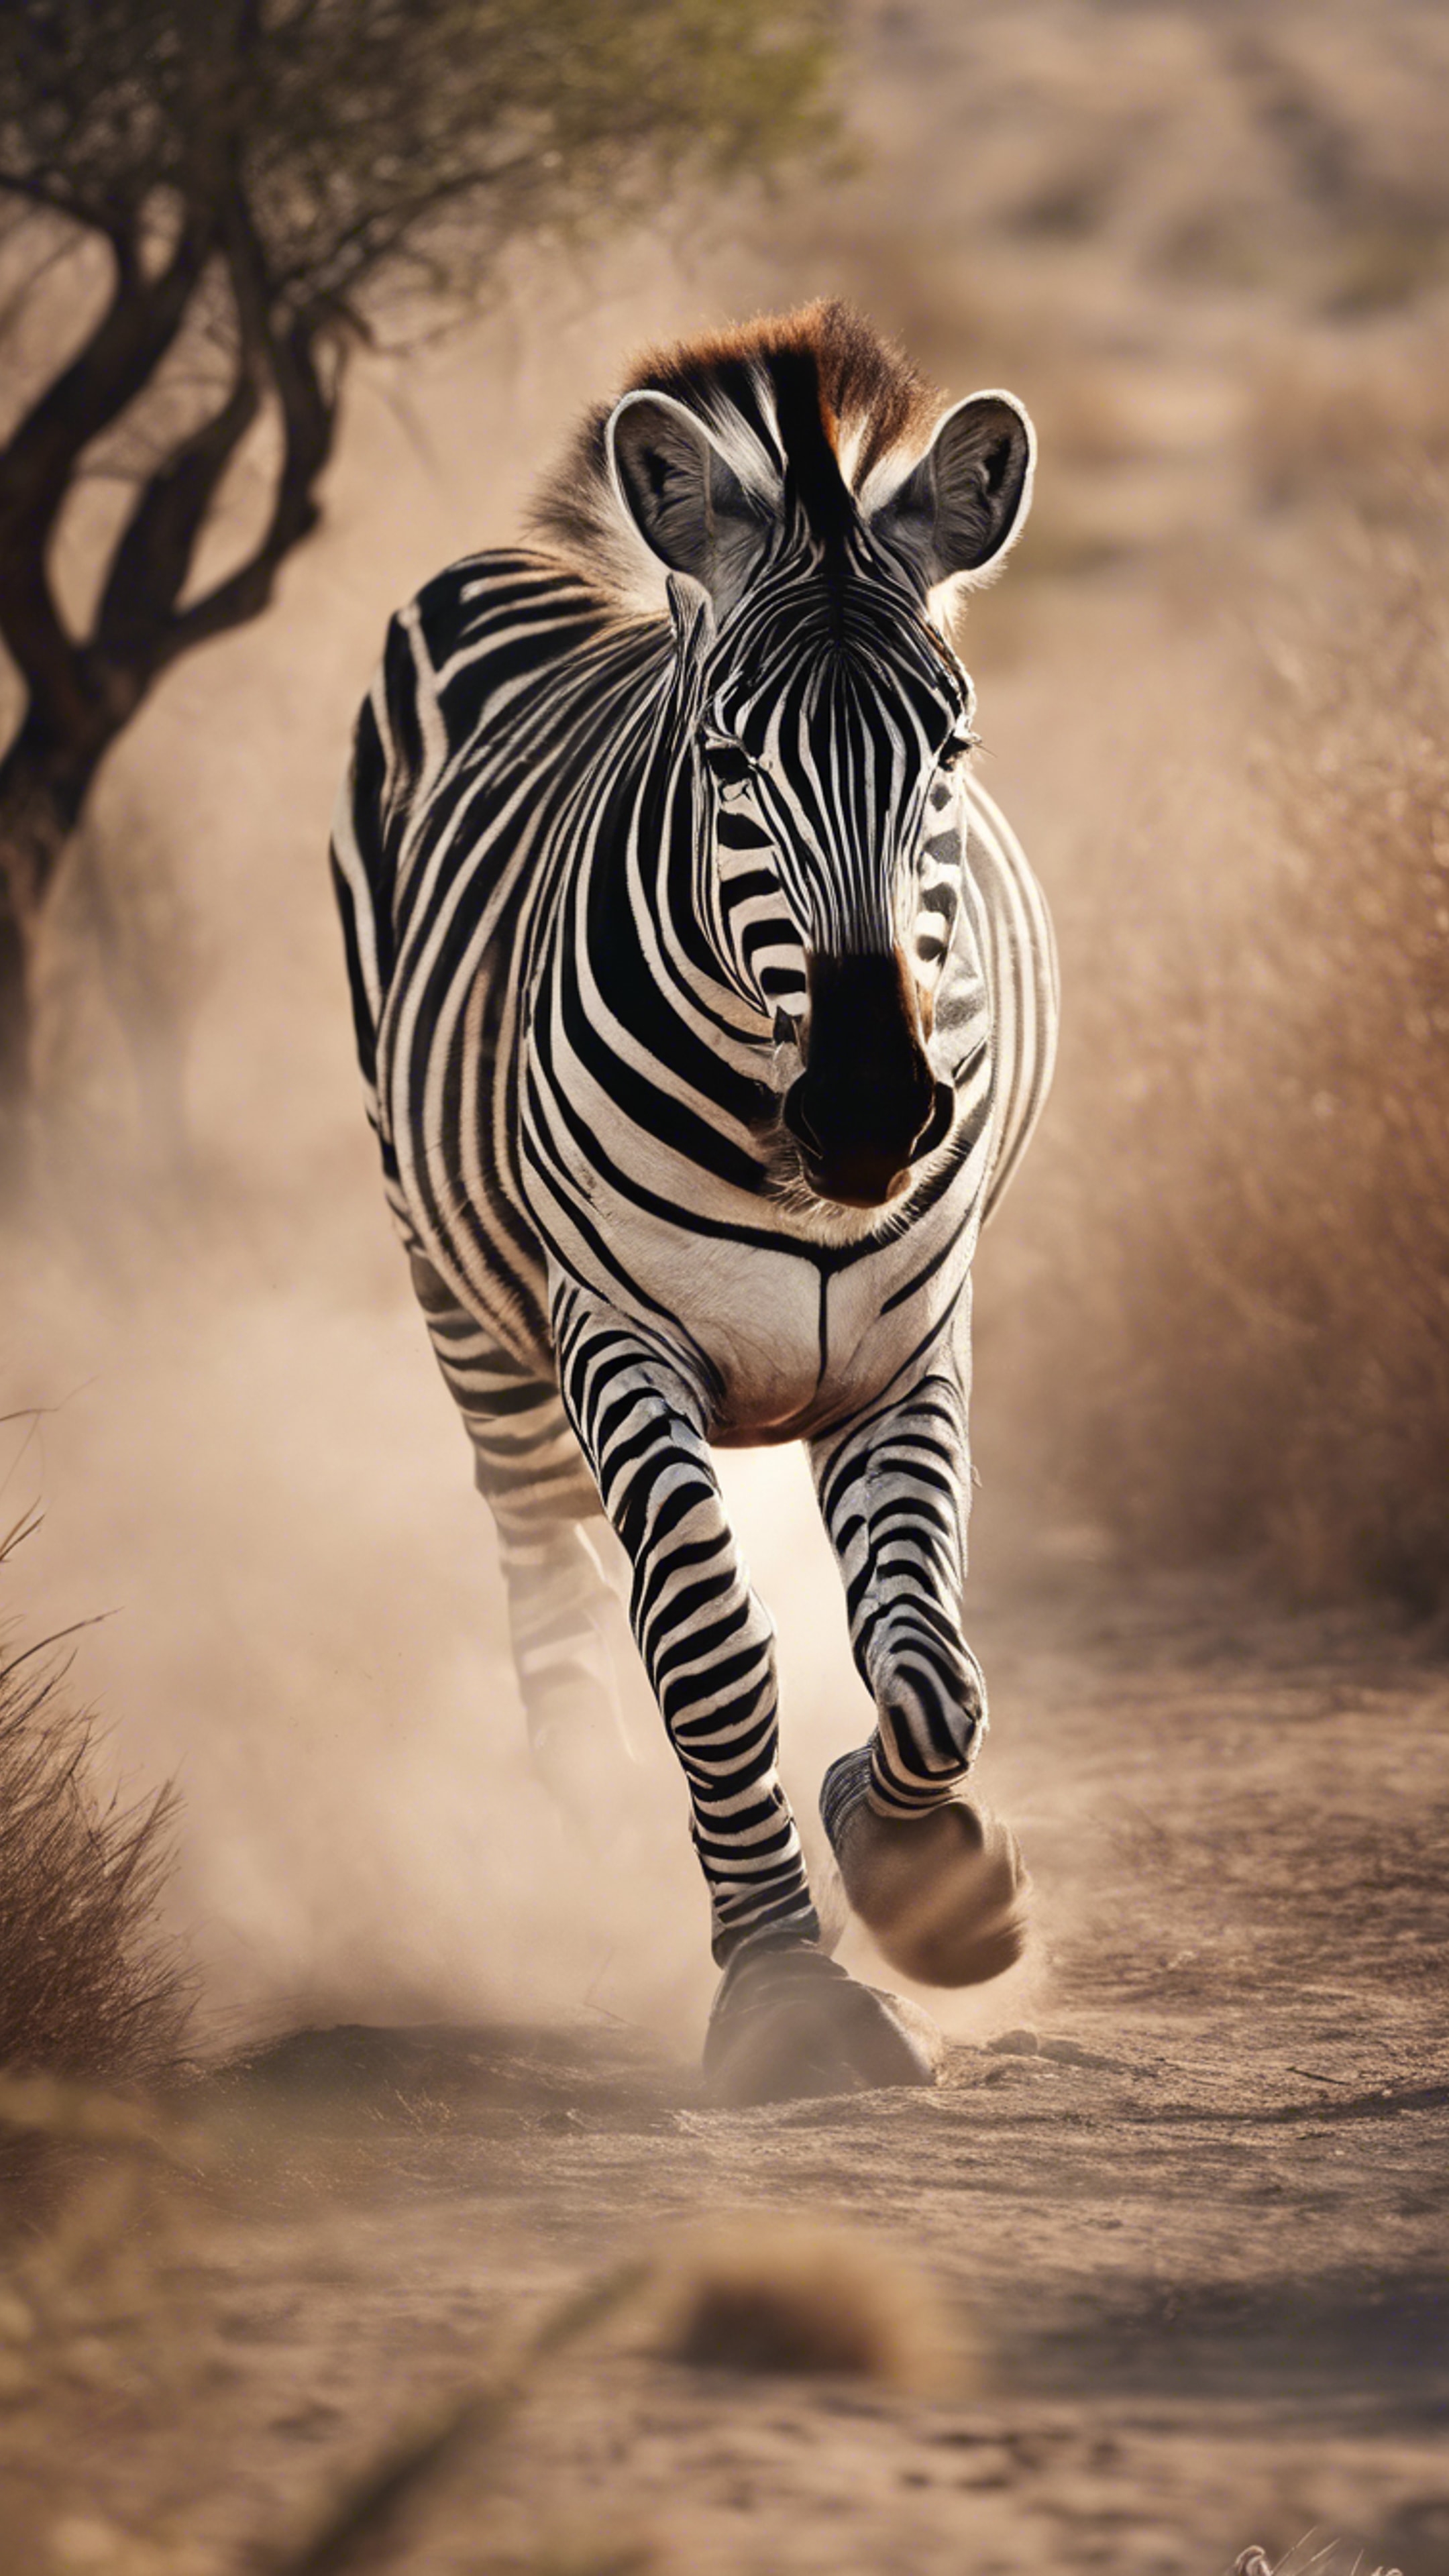 A drama-drenched scene of a lone zebra escaping from the chase of a lion.壁紙[cee409e9122146049413]